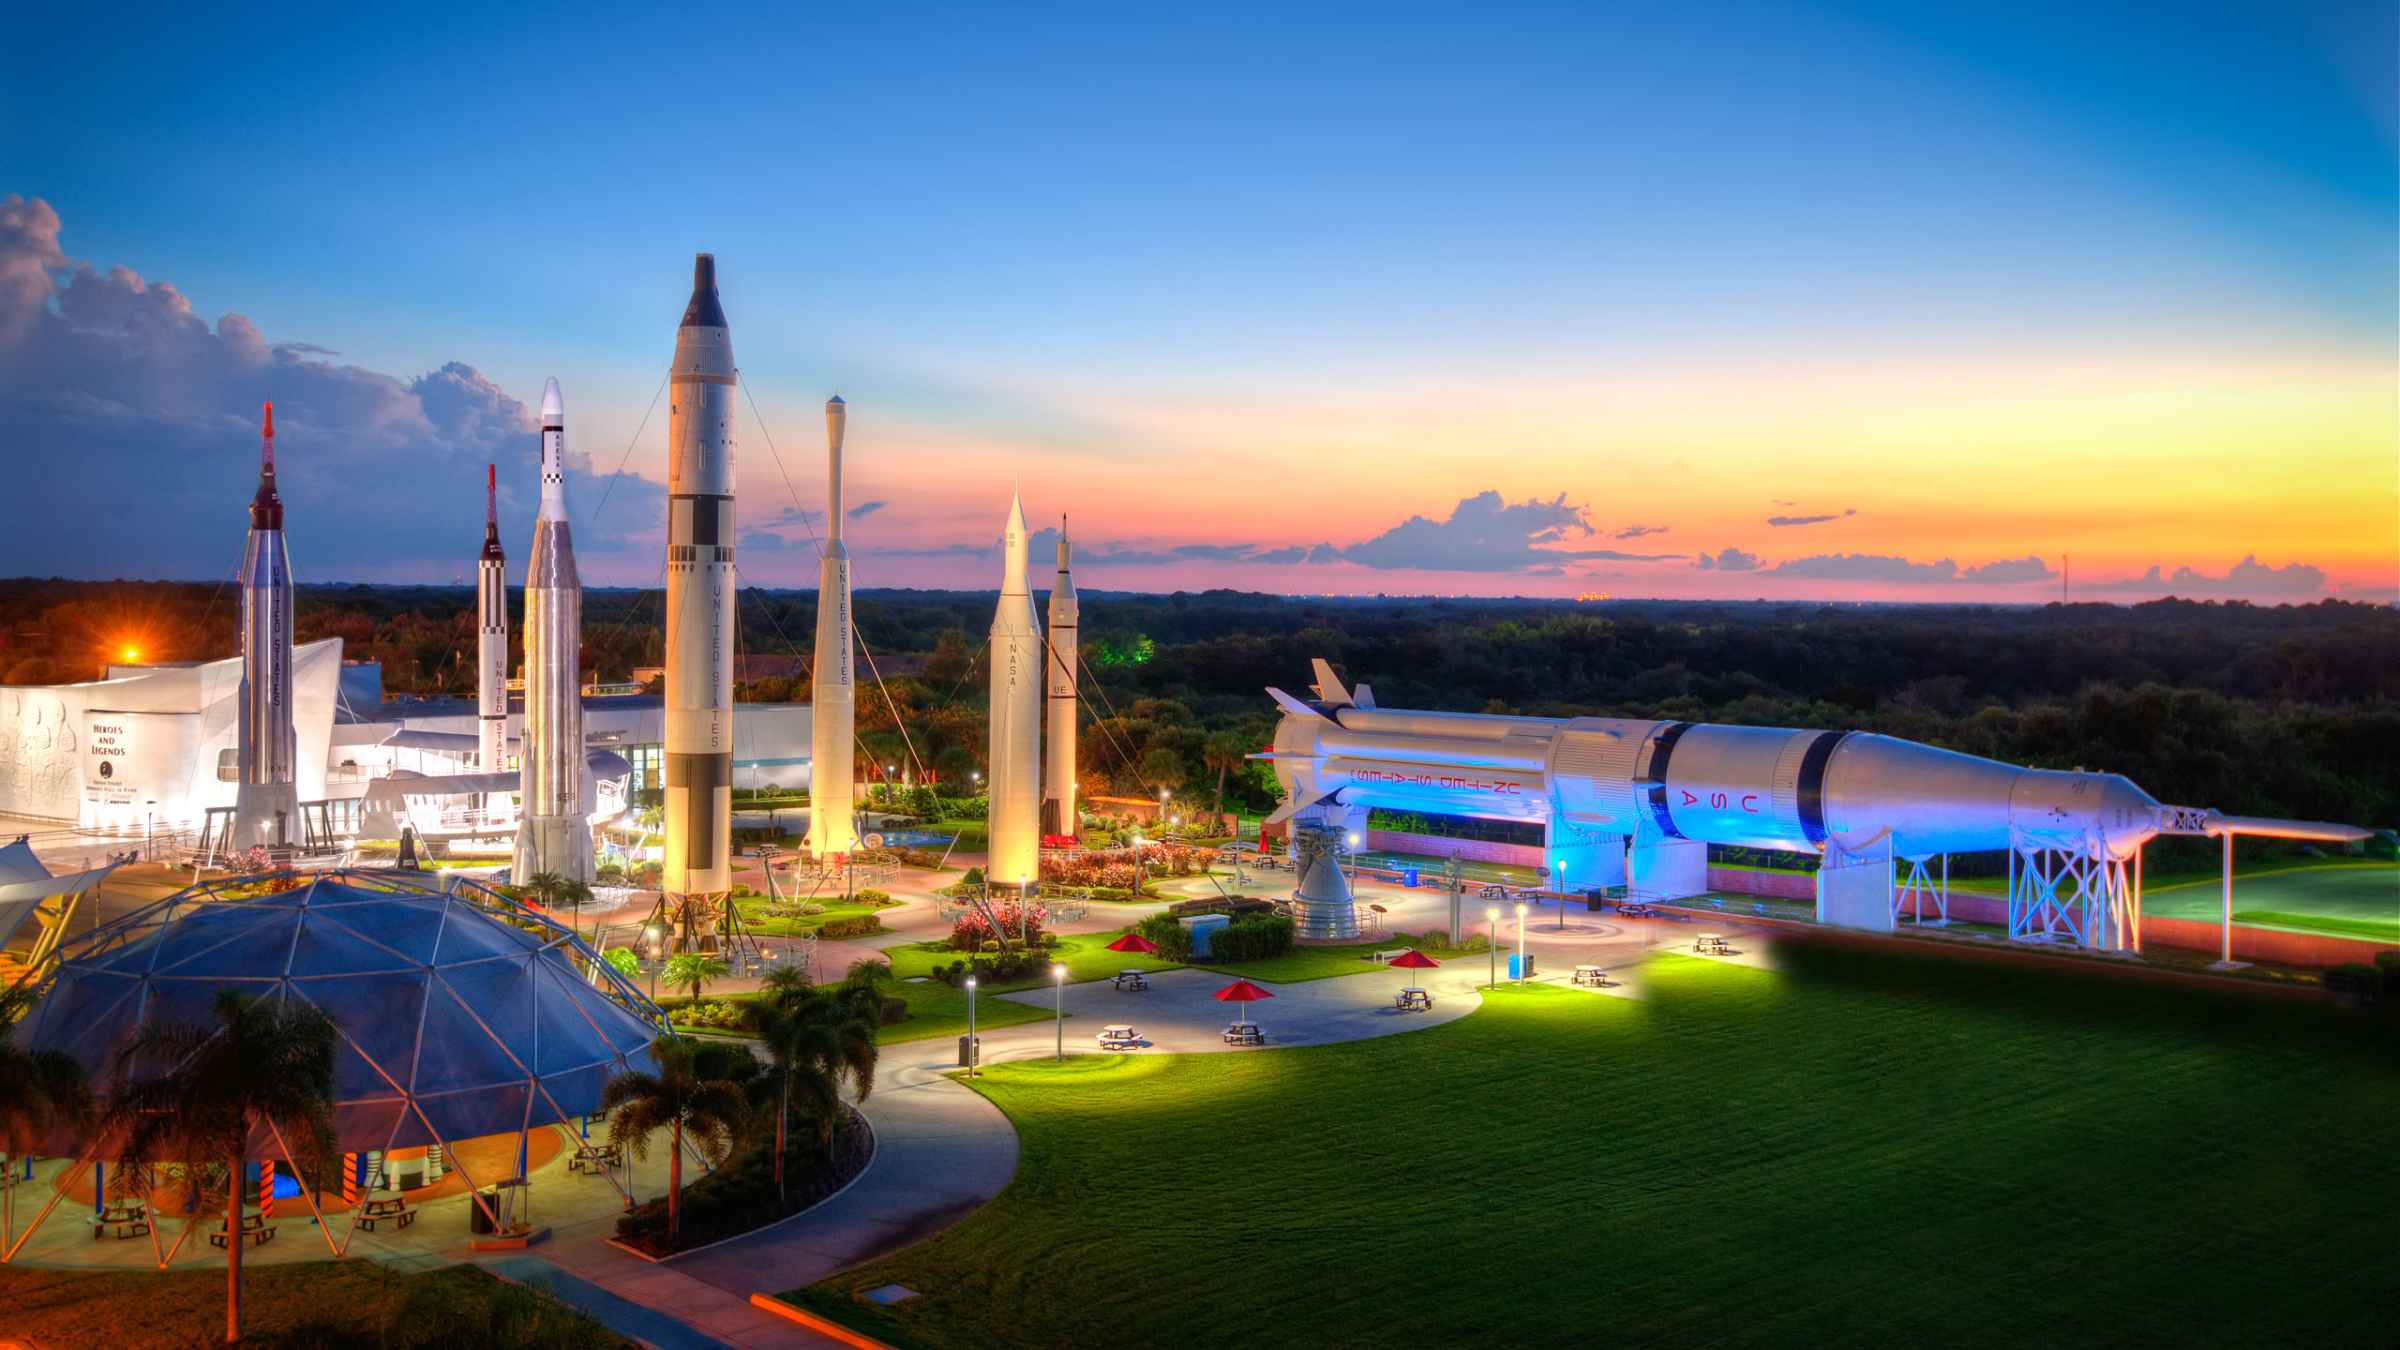 where to stay to visit kennedy space center